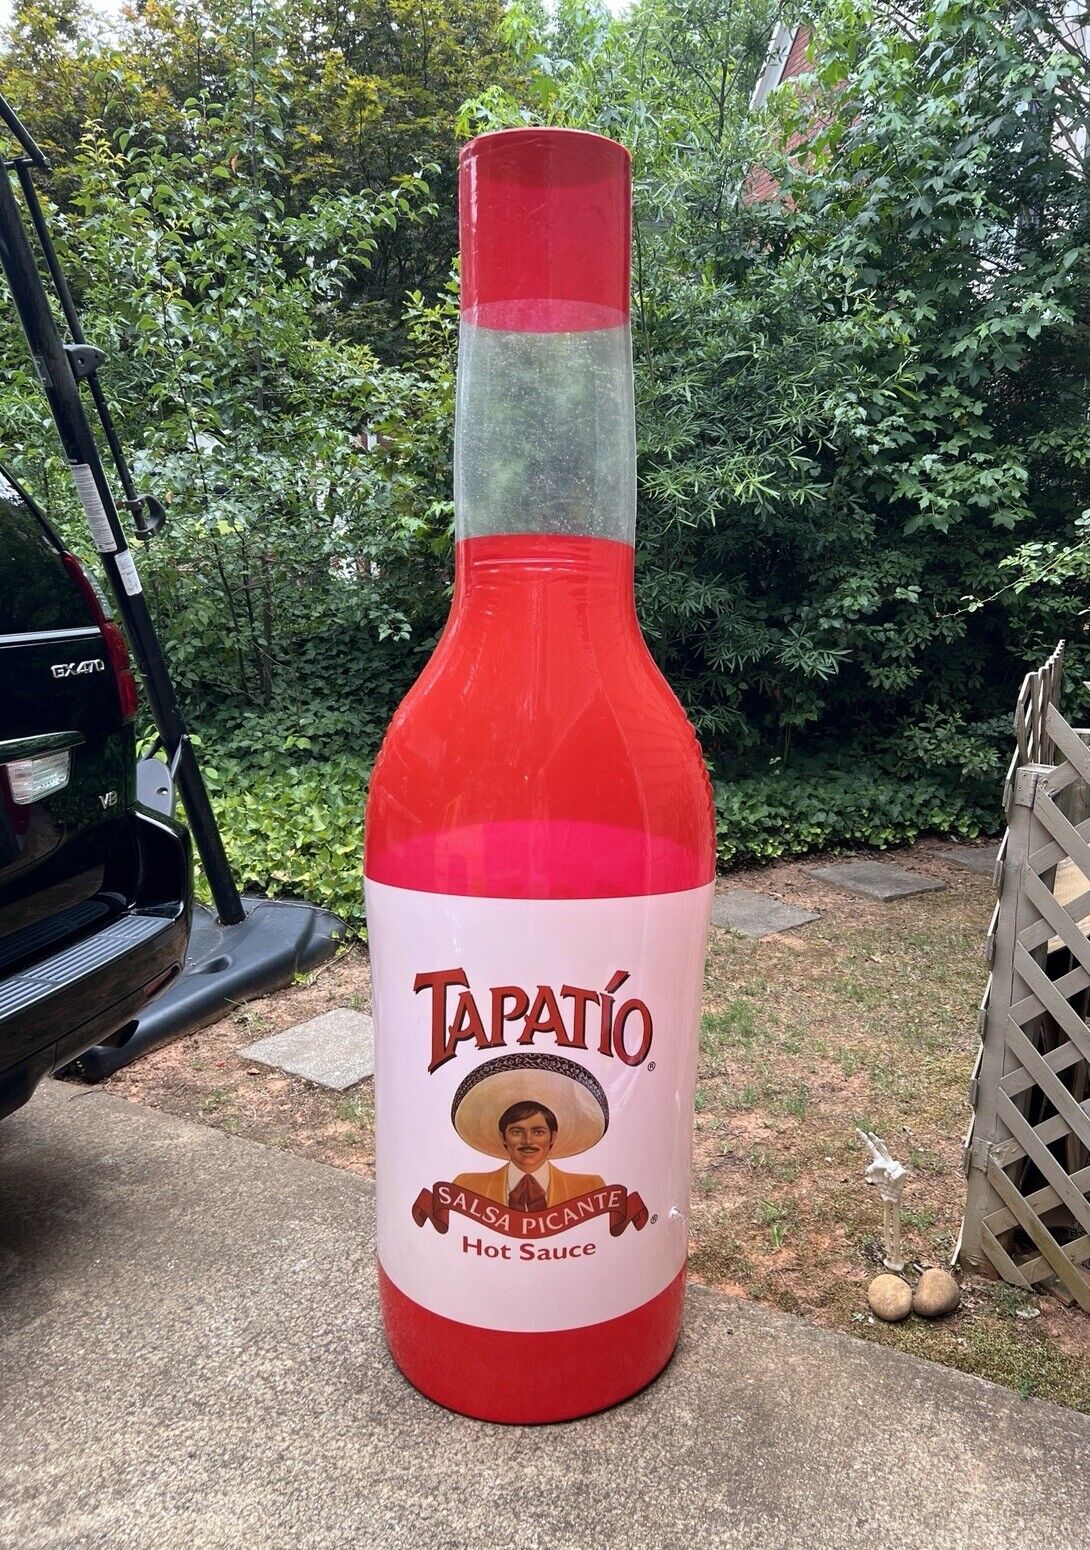 RARE 7 FOOT Tapatio hot sauce Inflatable DISPLAY STORE Bottle Promo Advertising